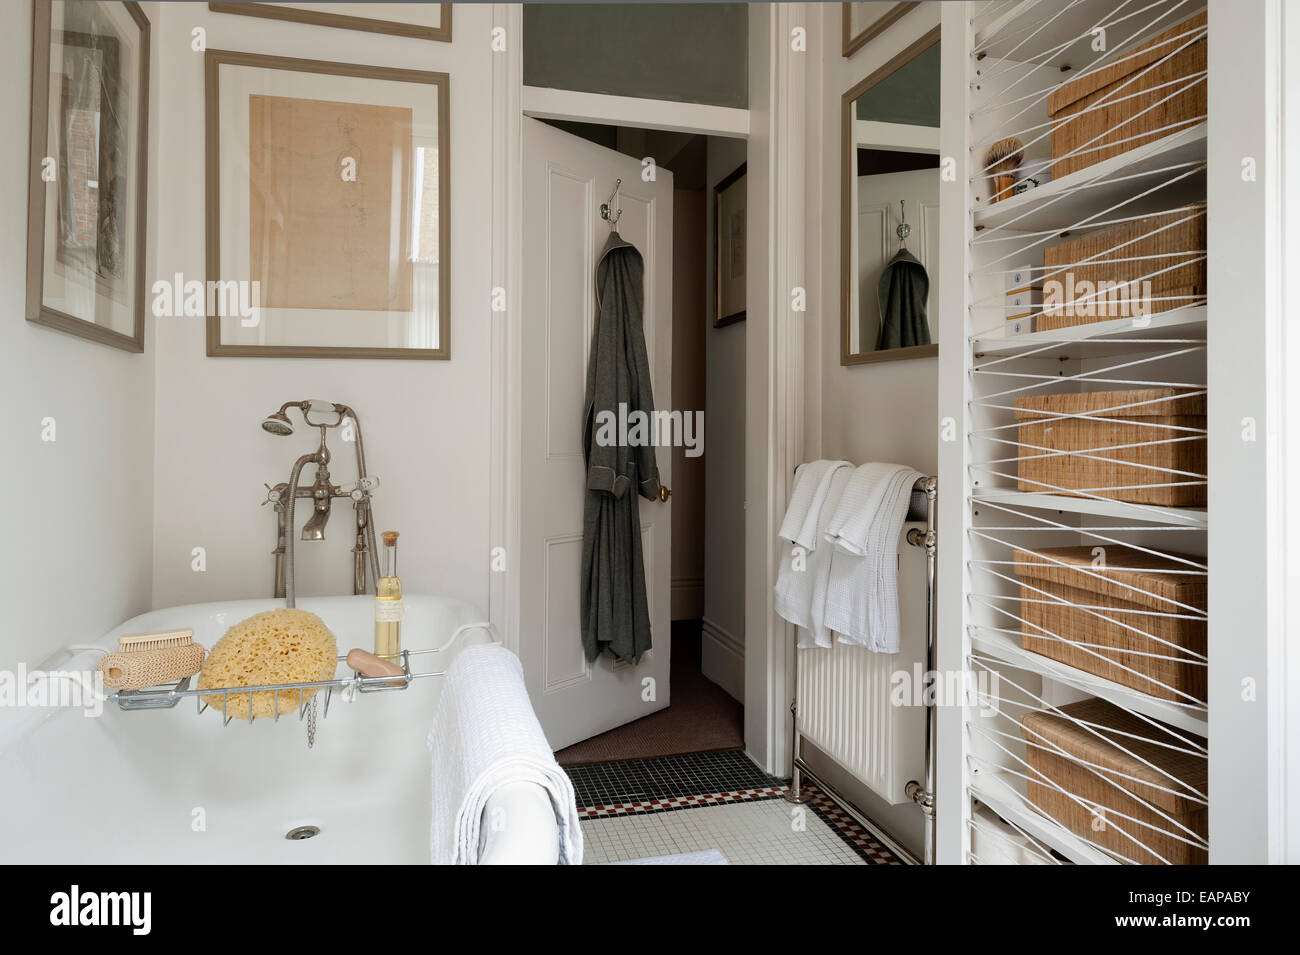 Antique prints and drawings on wall of bathroom with freestanding bath and tiled floor Stock Photo